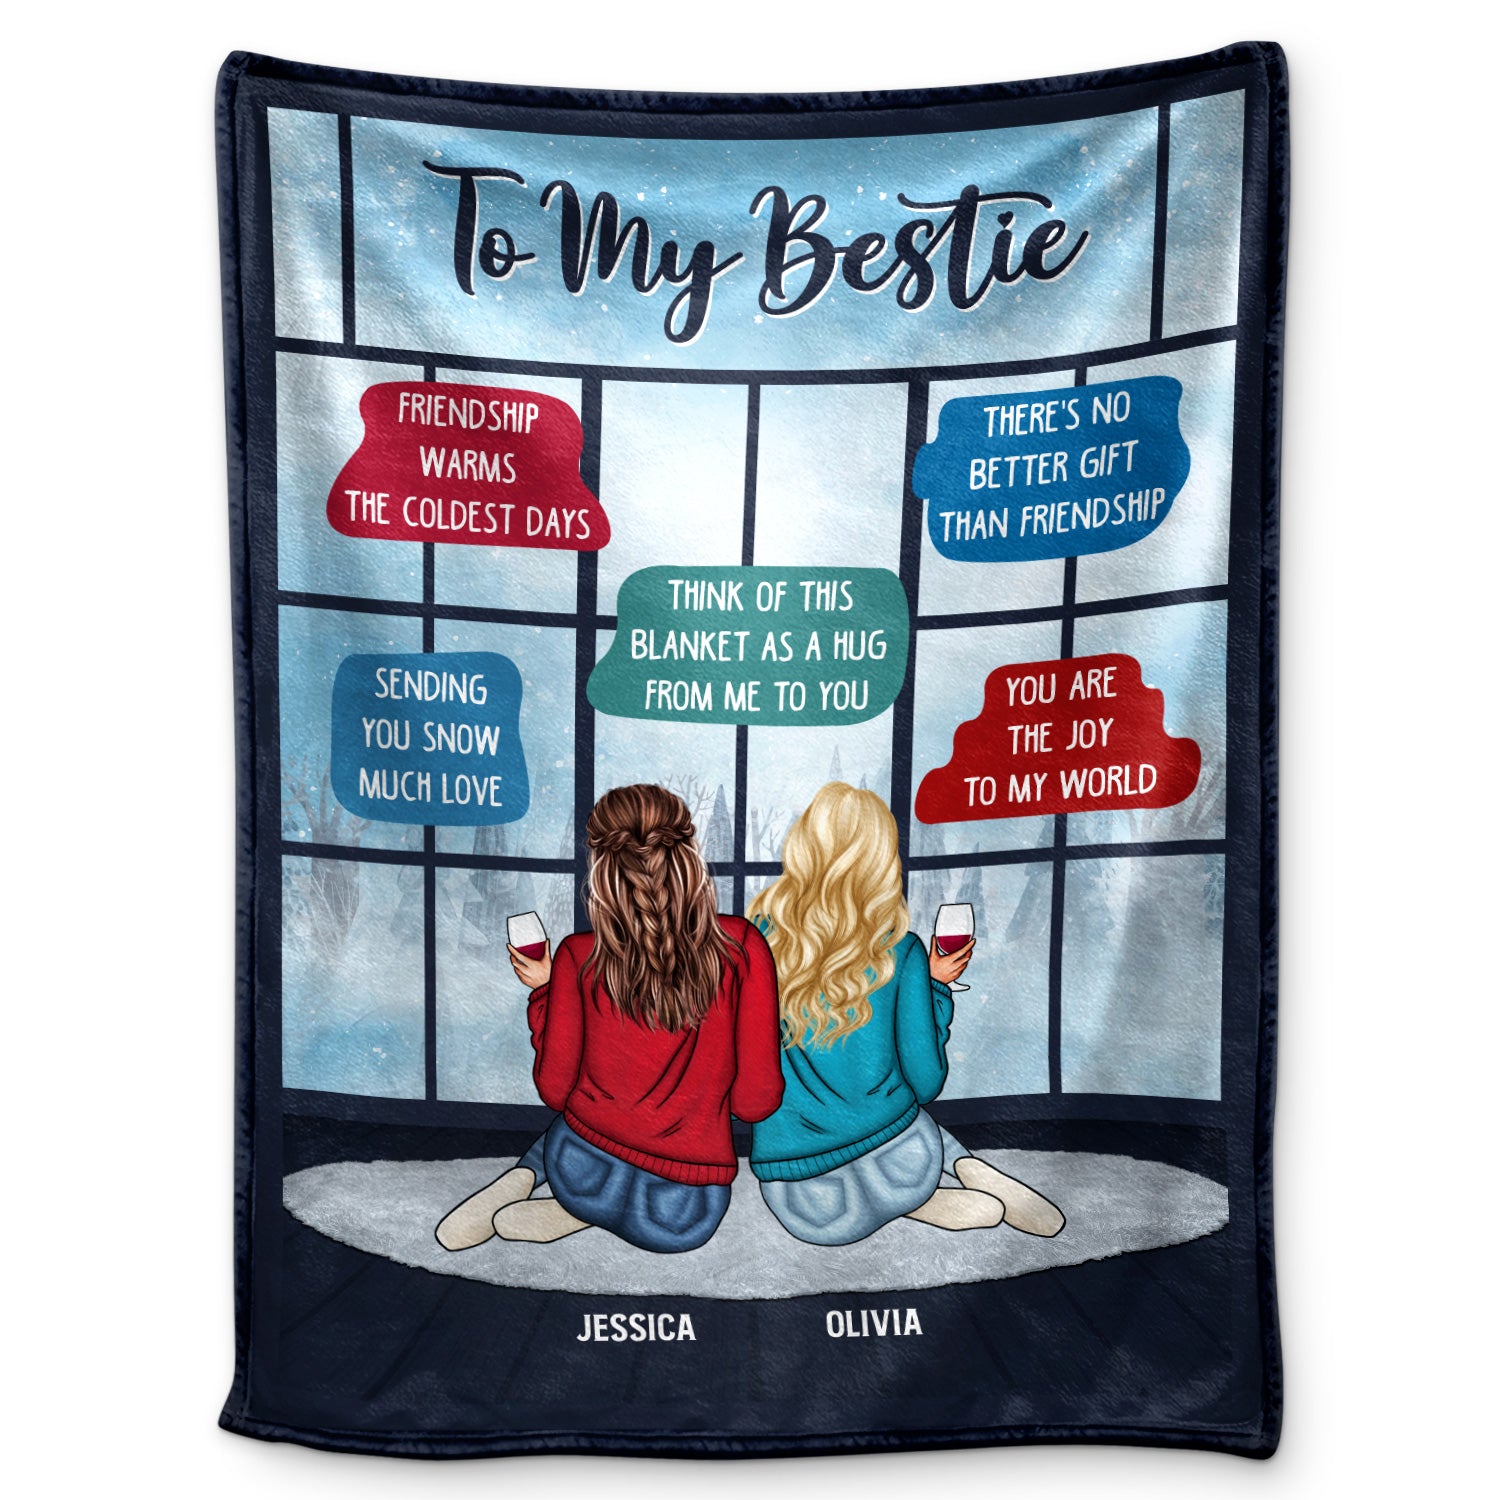 Friendship Warms The Coldest Days - Gift For Besties - Personalized Fleece Blanket